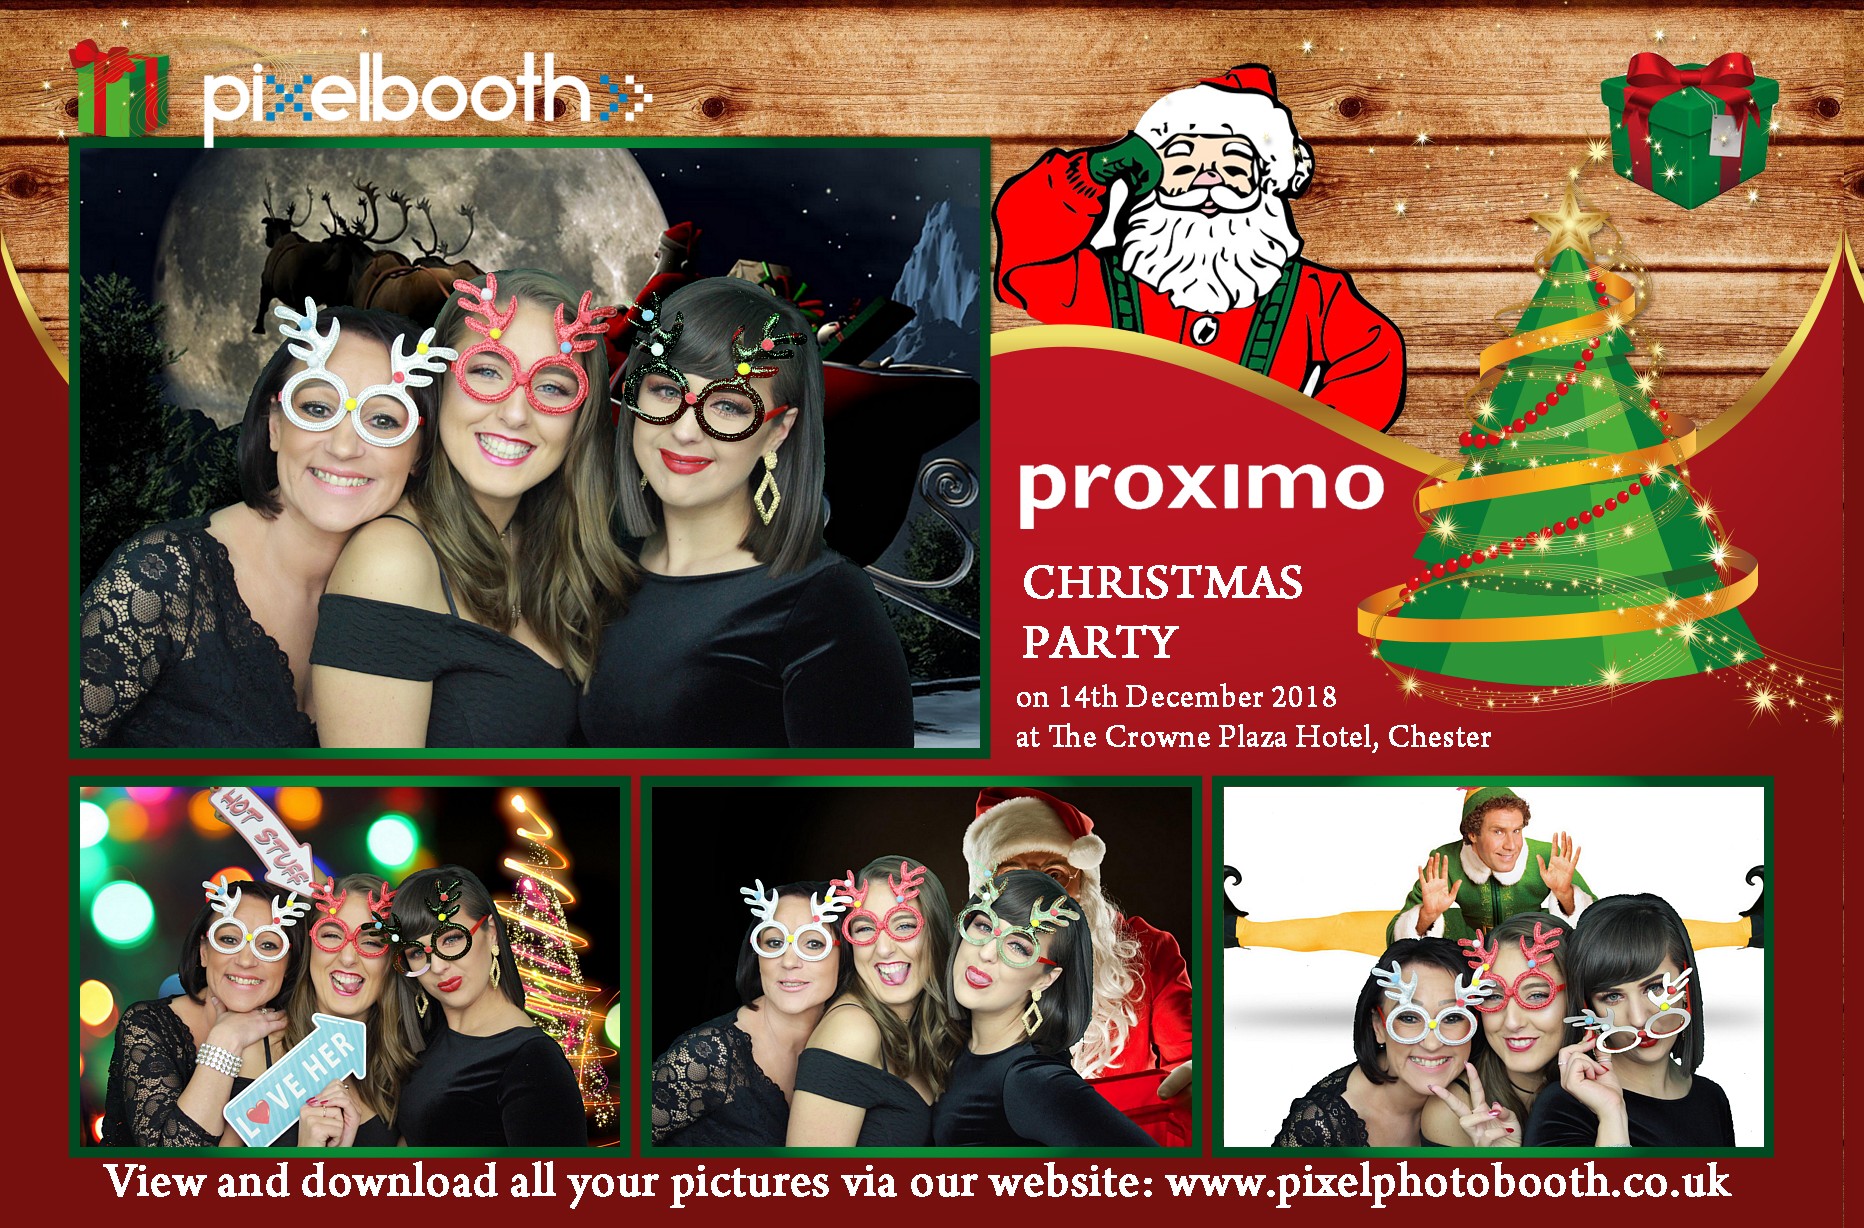 14th Dec 2018: Proximo XMas Party at The Crowne Plaza, Chester